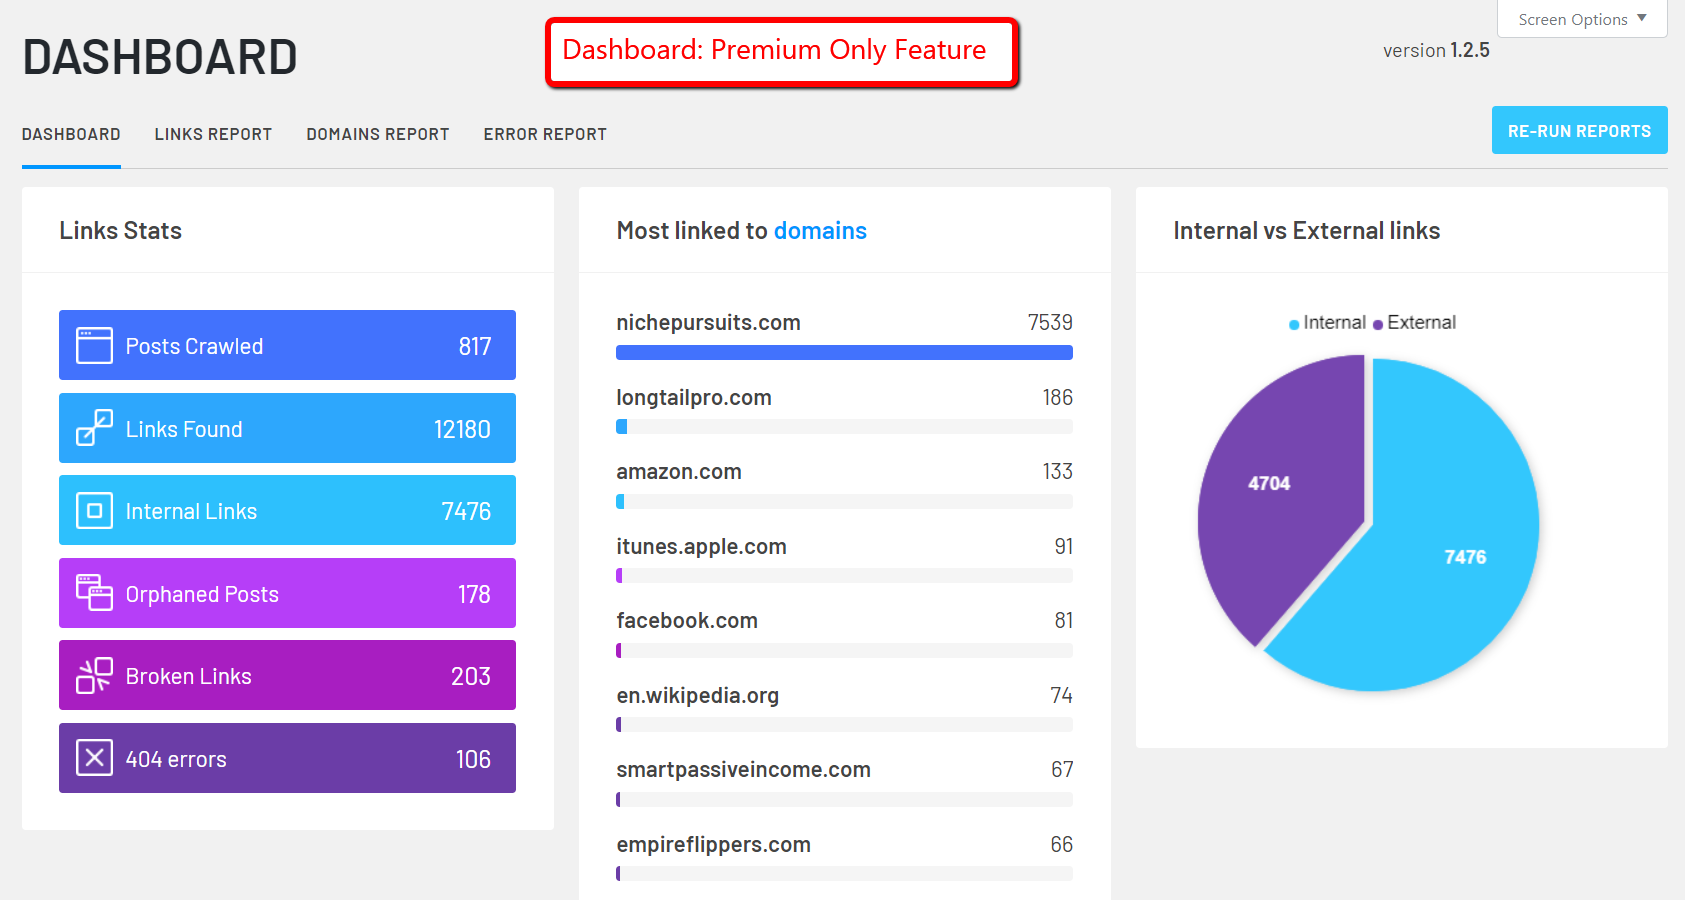 [Premium] The Dashboard gives you indepth reports on all of your site's links.